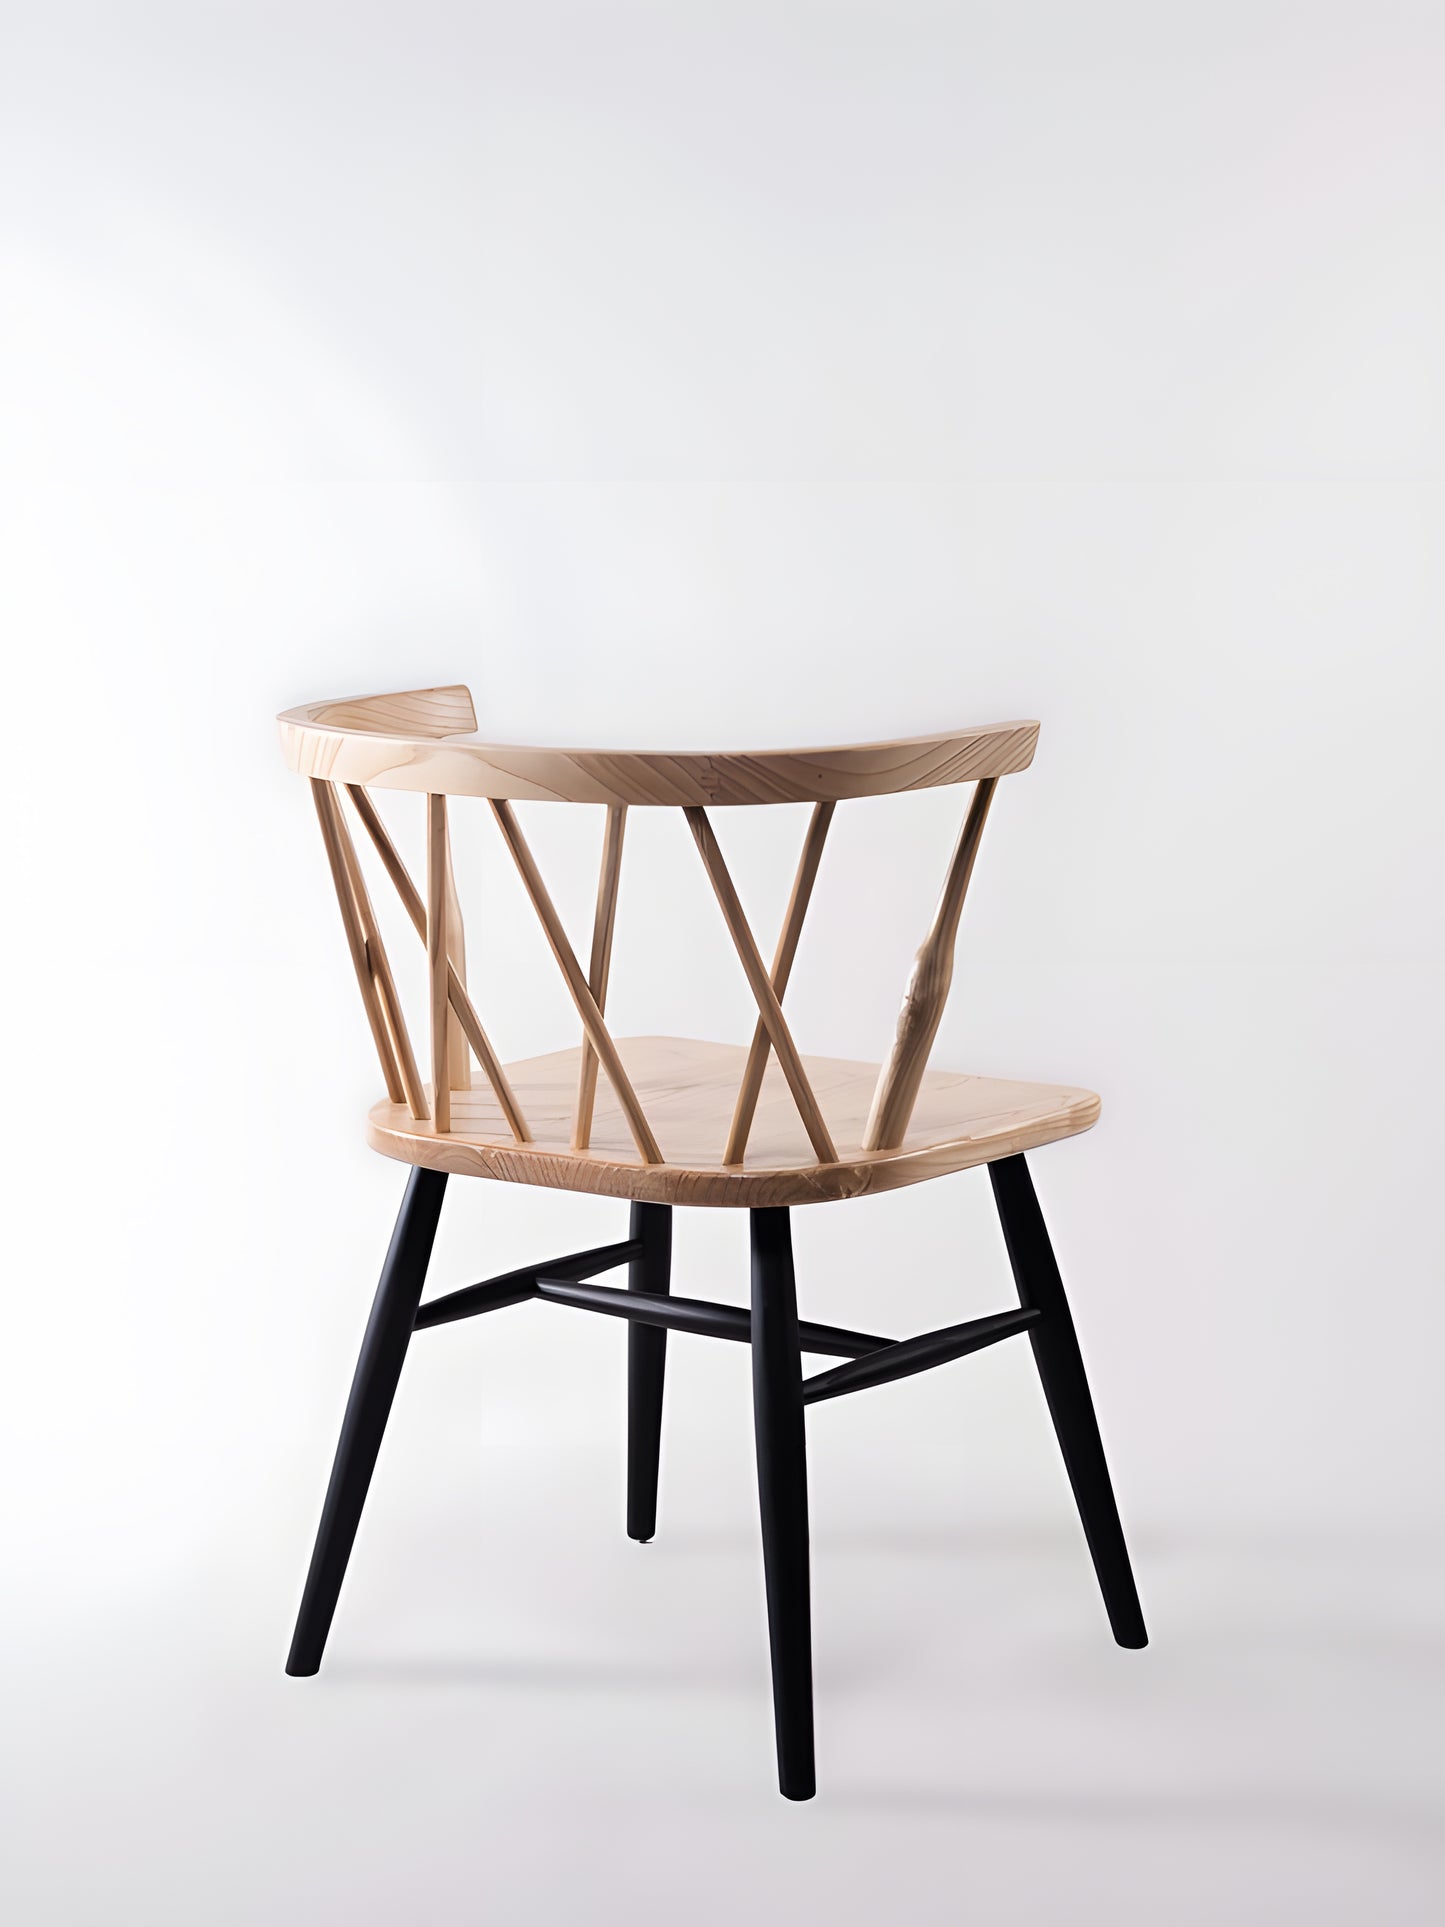 Fallas Sungkai Wood Cross Back Dining Chair with black painted legs back view by Mellowdays Furniture